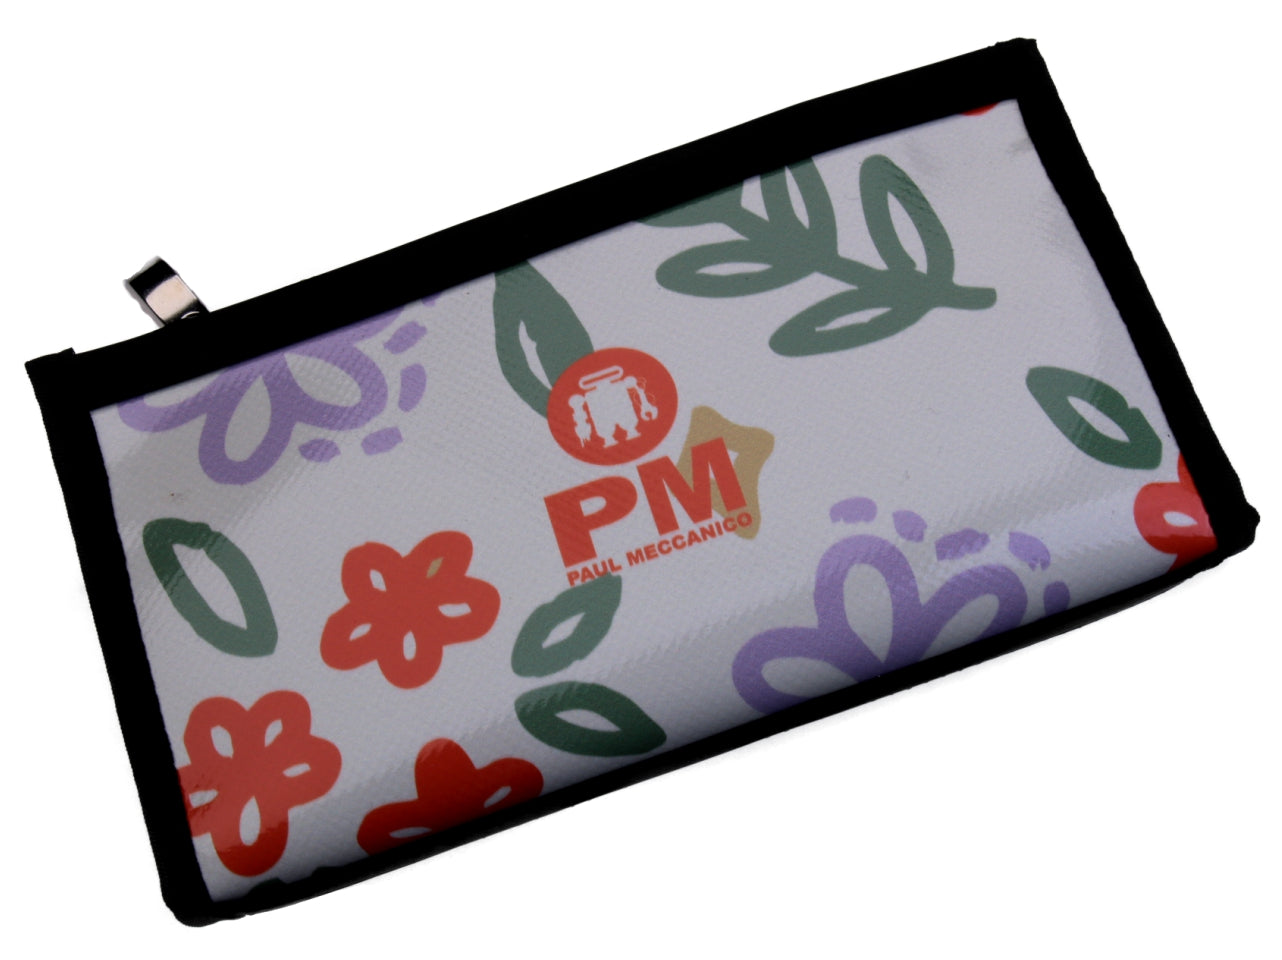 BEIGE LARGE WOMEN'S WALLET WITH FLORAL FANTASY. MODEL PIT MADE OF LORRY TARPAULIN. - Limited Edition Paul Meccanico